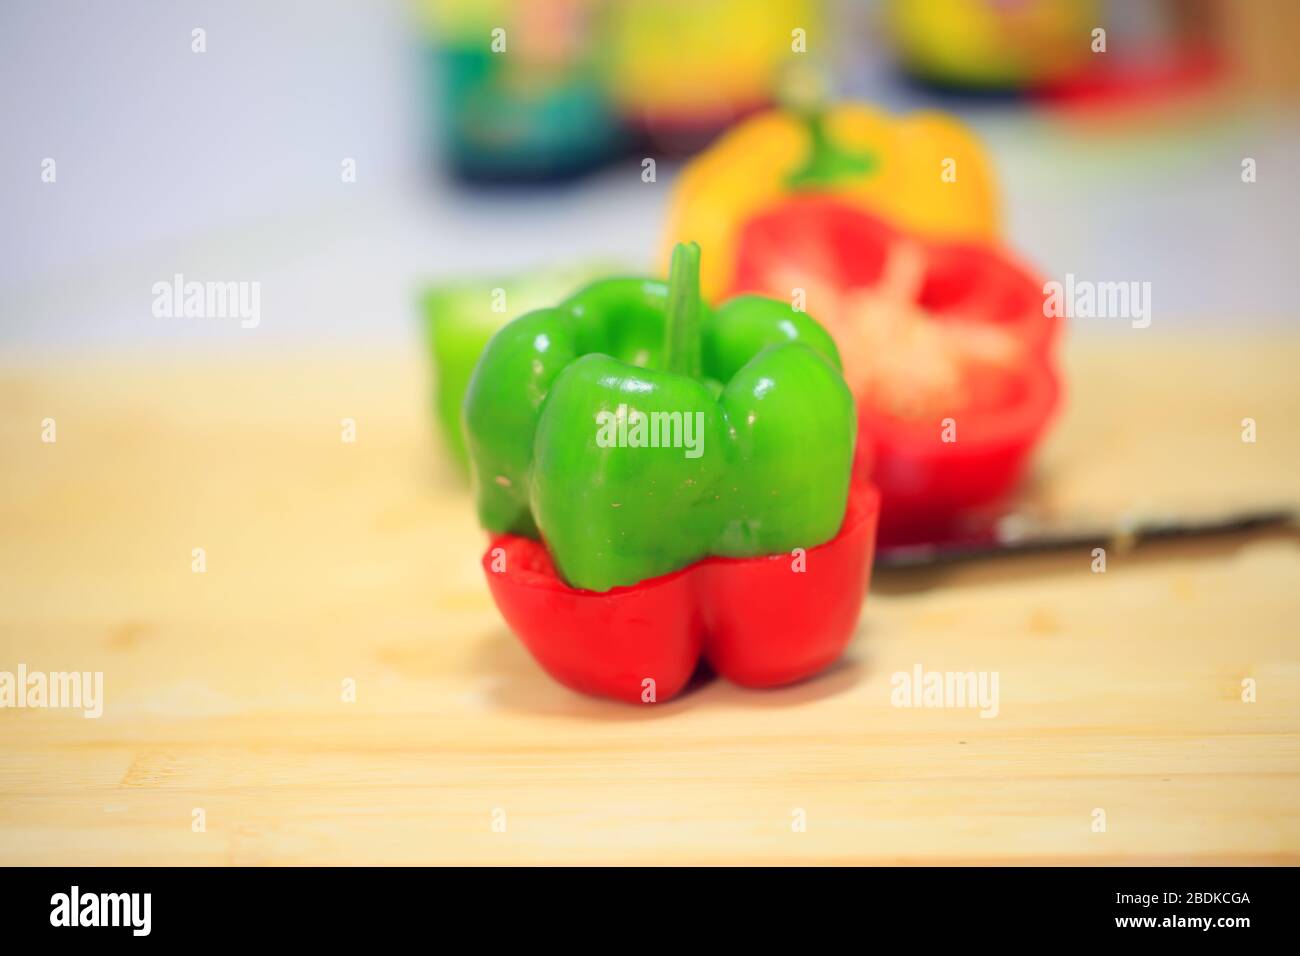 The color pepper is on the cutting board Stock Photo